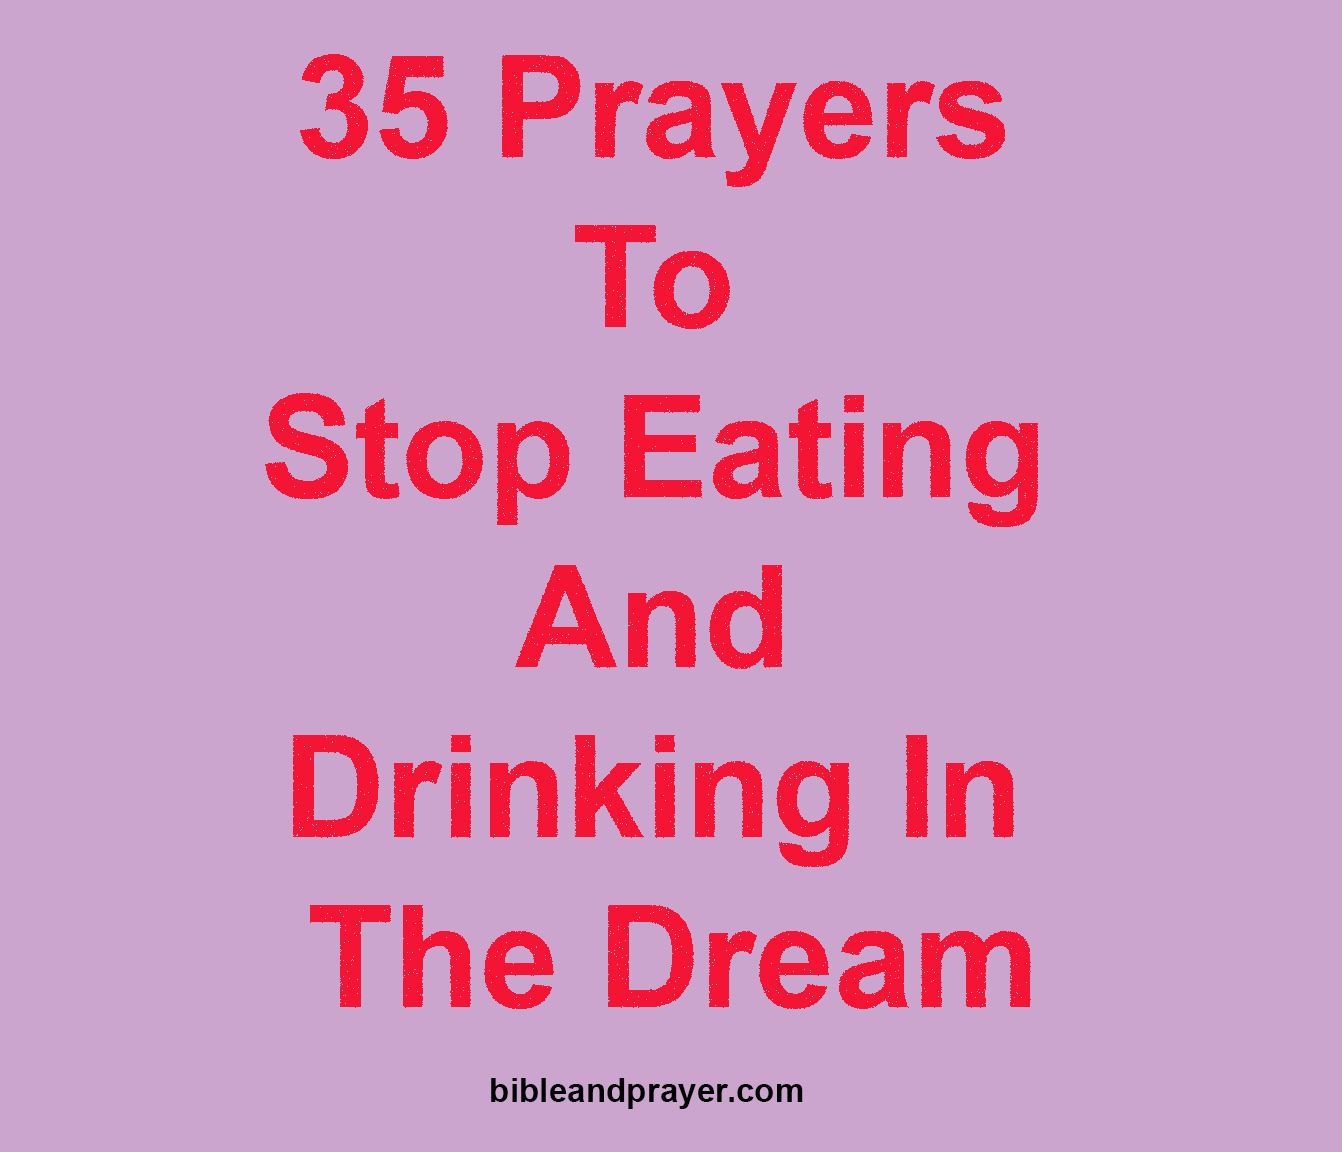 35 Prayers To Stop Eating And Drinking In The Dream